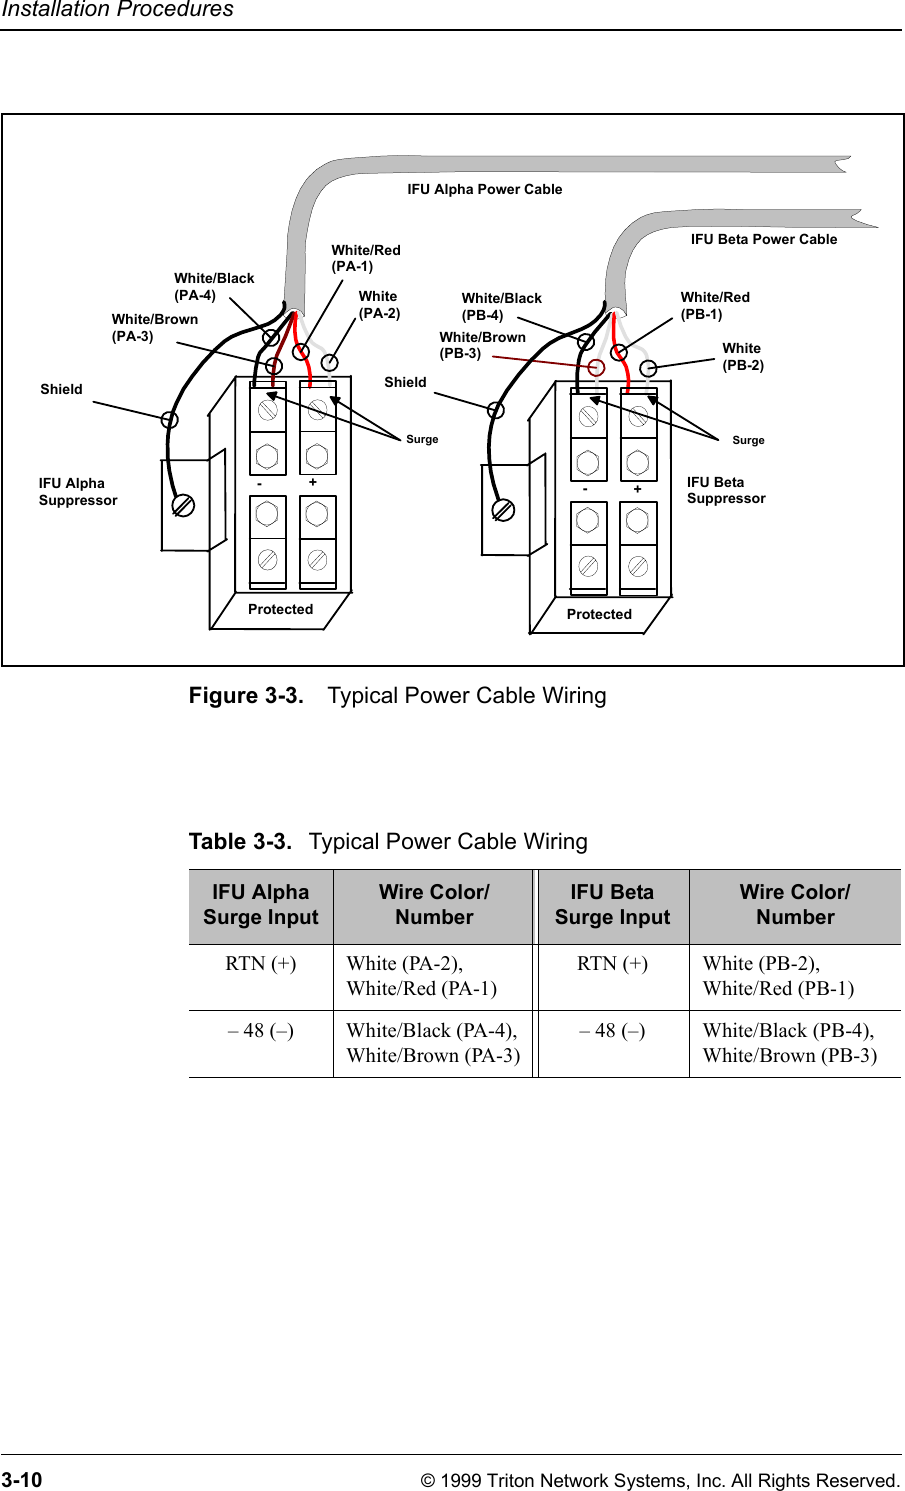 Installation Procedures3-10 © 1999 Triton Network Systems, Inc. All Rights Reserved.Figure 3-3. Typical Power Cable Wiring IFU AlphaSuppressorIFU BetaSuppressorIFU Beta Power CableWhite(PB-2)IFU Alpha Power CableWhite/Black(PA-4)White/Brown(PA-3)White/Red(PA-1)ProtectedShield-+-+White(PA-2)White/Red(PB-1)White/Black(PB-4)White/Brown(PB-3)ShieldProtectedSurge SurgeTable 3-3. Typical Power Cable Wiring IFU AlphaSurge InputWire Color/NumberIFU BetaSurge InputWire Color/NumberRTN (+) White (PA-2),White/Red (PA-1)RTN (+) White (PB-2),White/Red (PB-1)– 48 (–)  White/Black (PA-4),White/Brown (PA-3)– 48 (–)  White/Black (PB-4),White/Brown (PB-3)